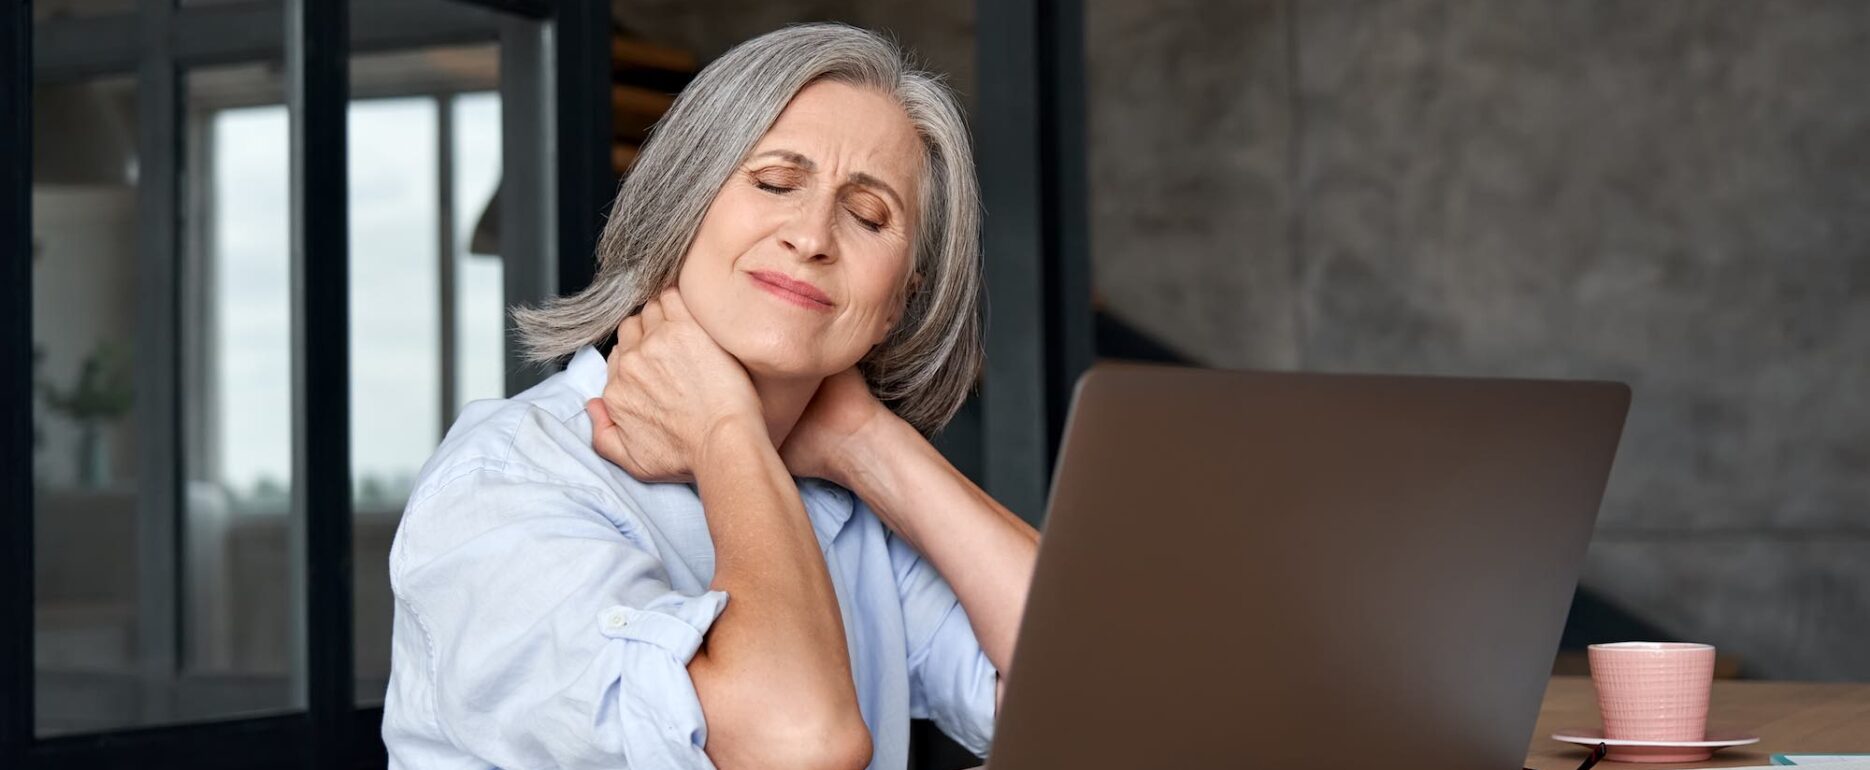 Can a rotator cuff tear cause neck pain